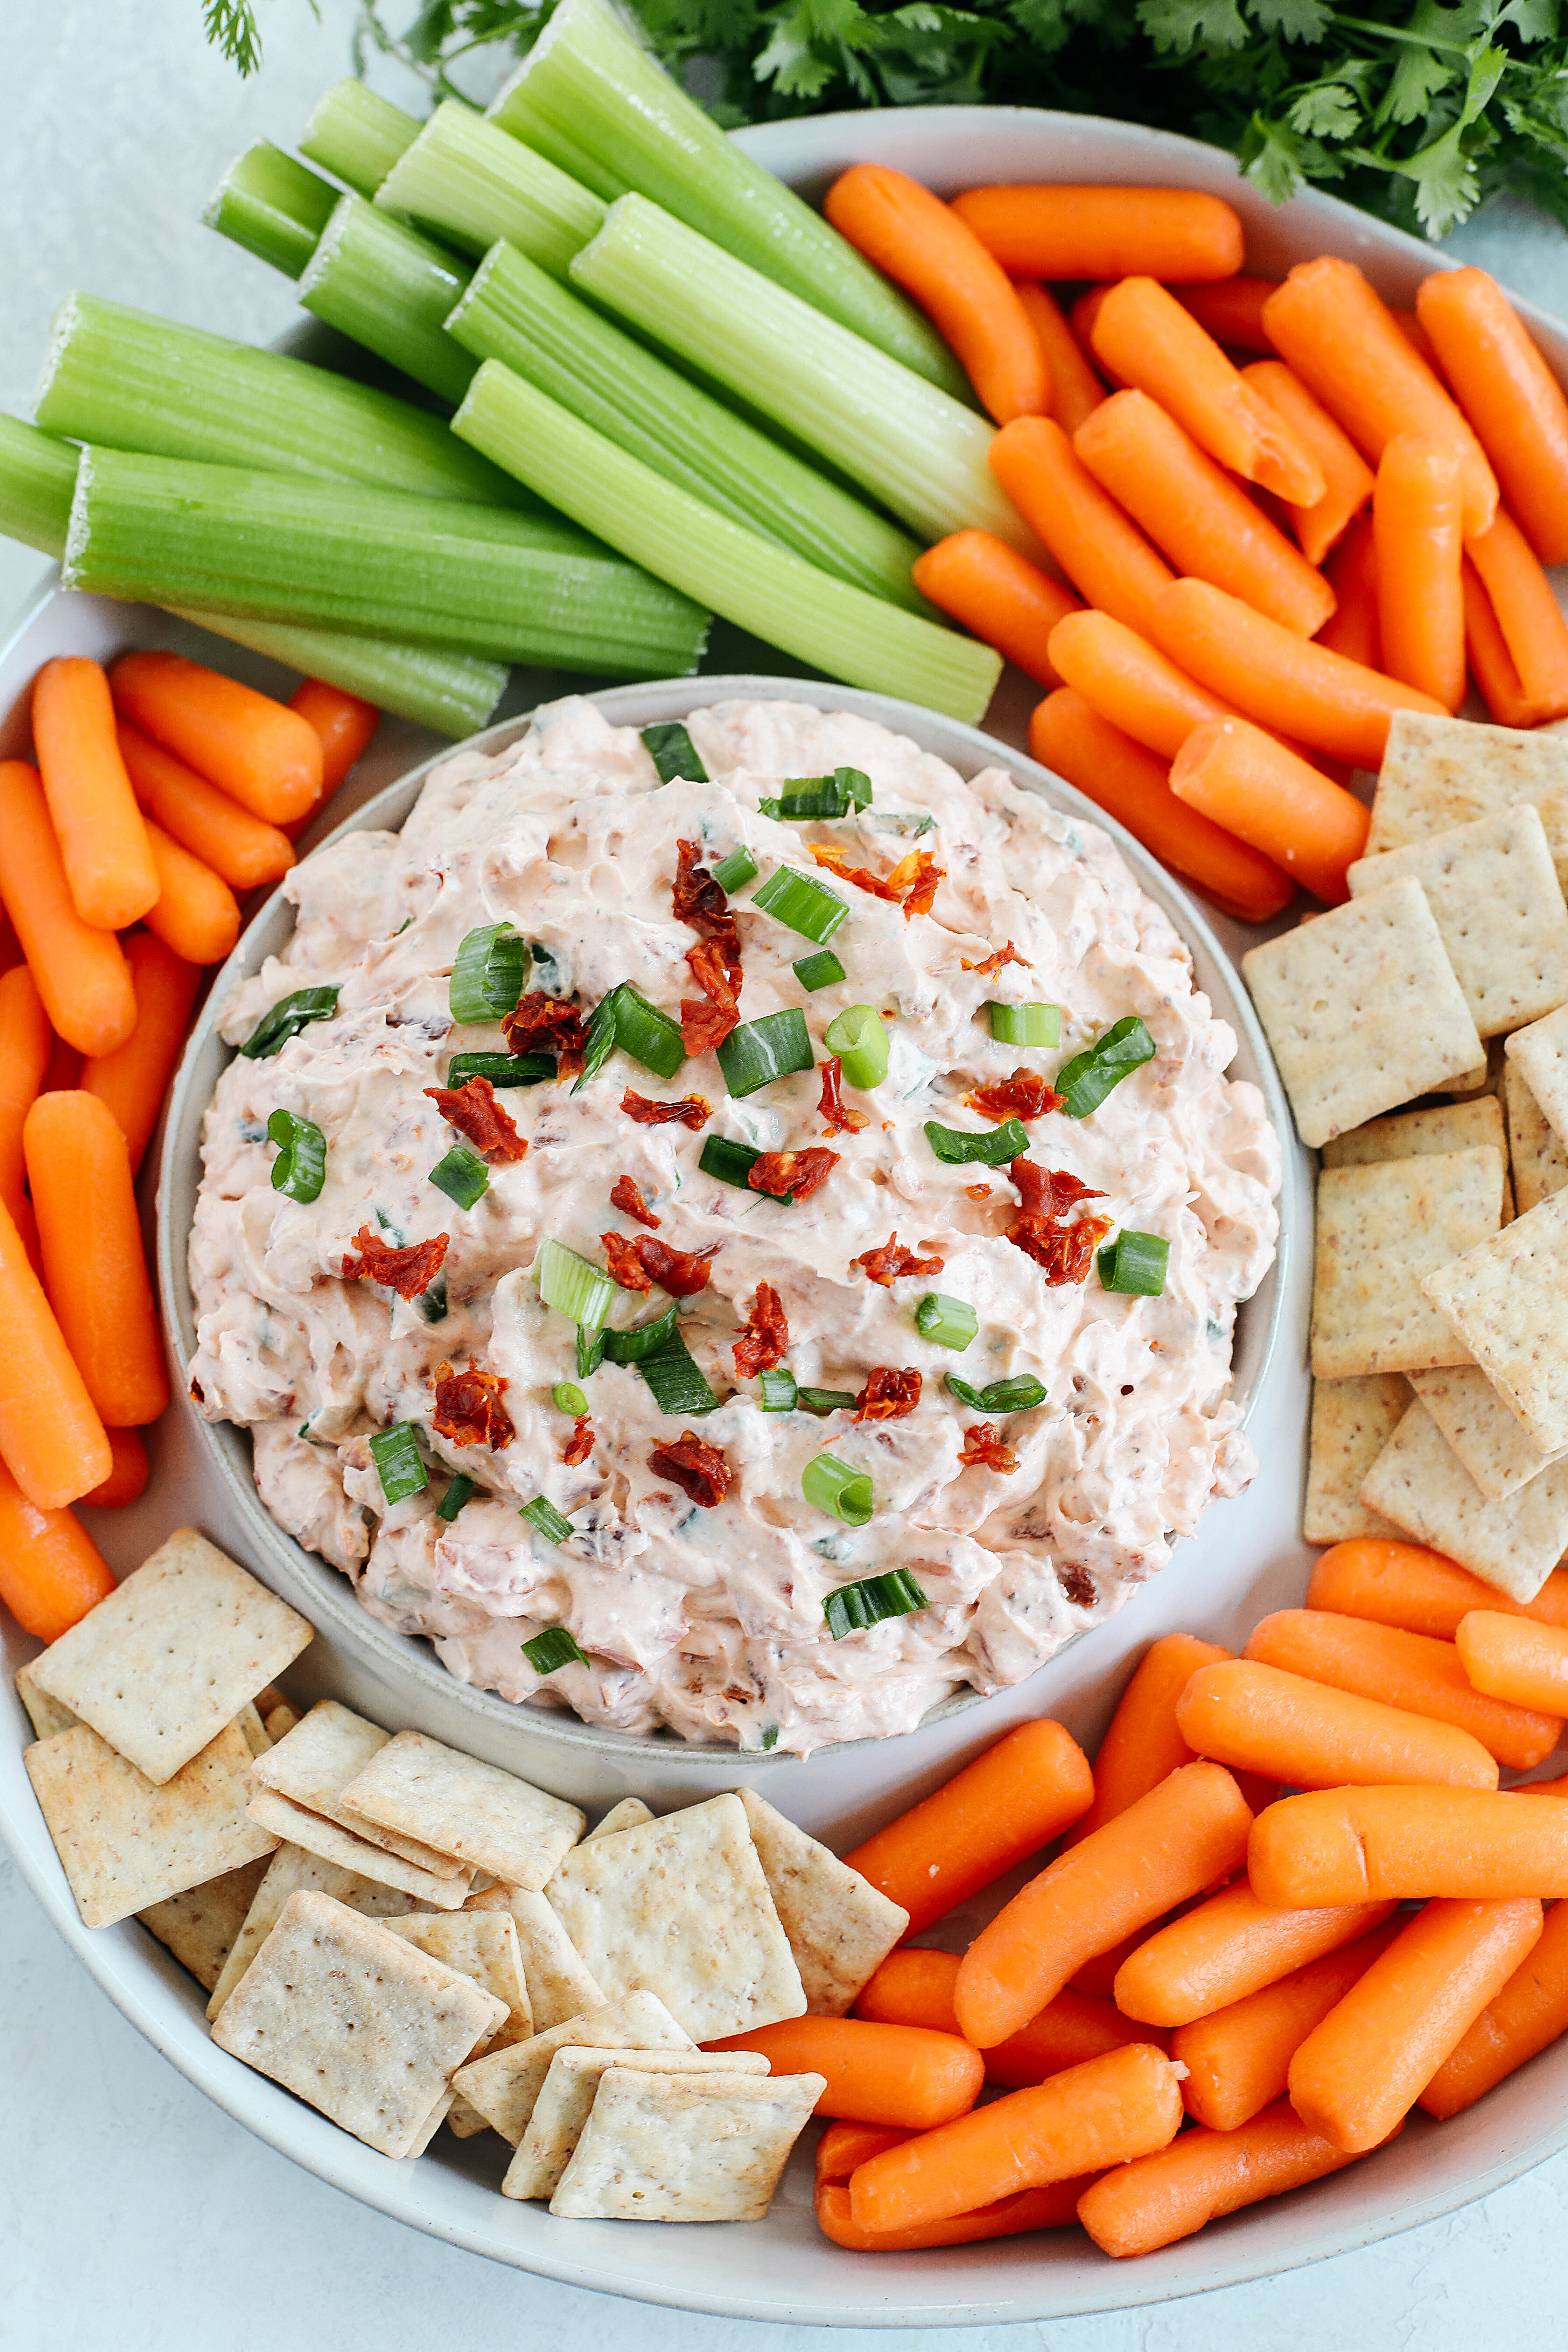 Creamy and delicious Sun Dried Tomato Dip with tons of flavor and easily made in just minutes for the perfect crowd-pleasing appetizer!